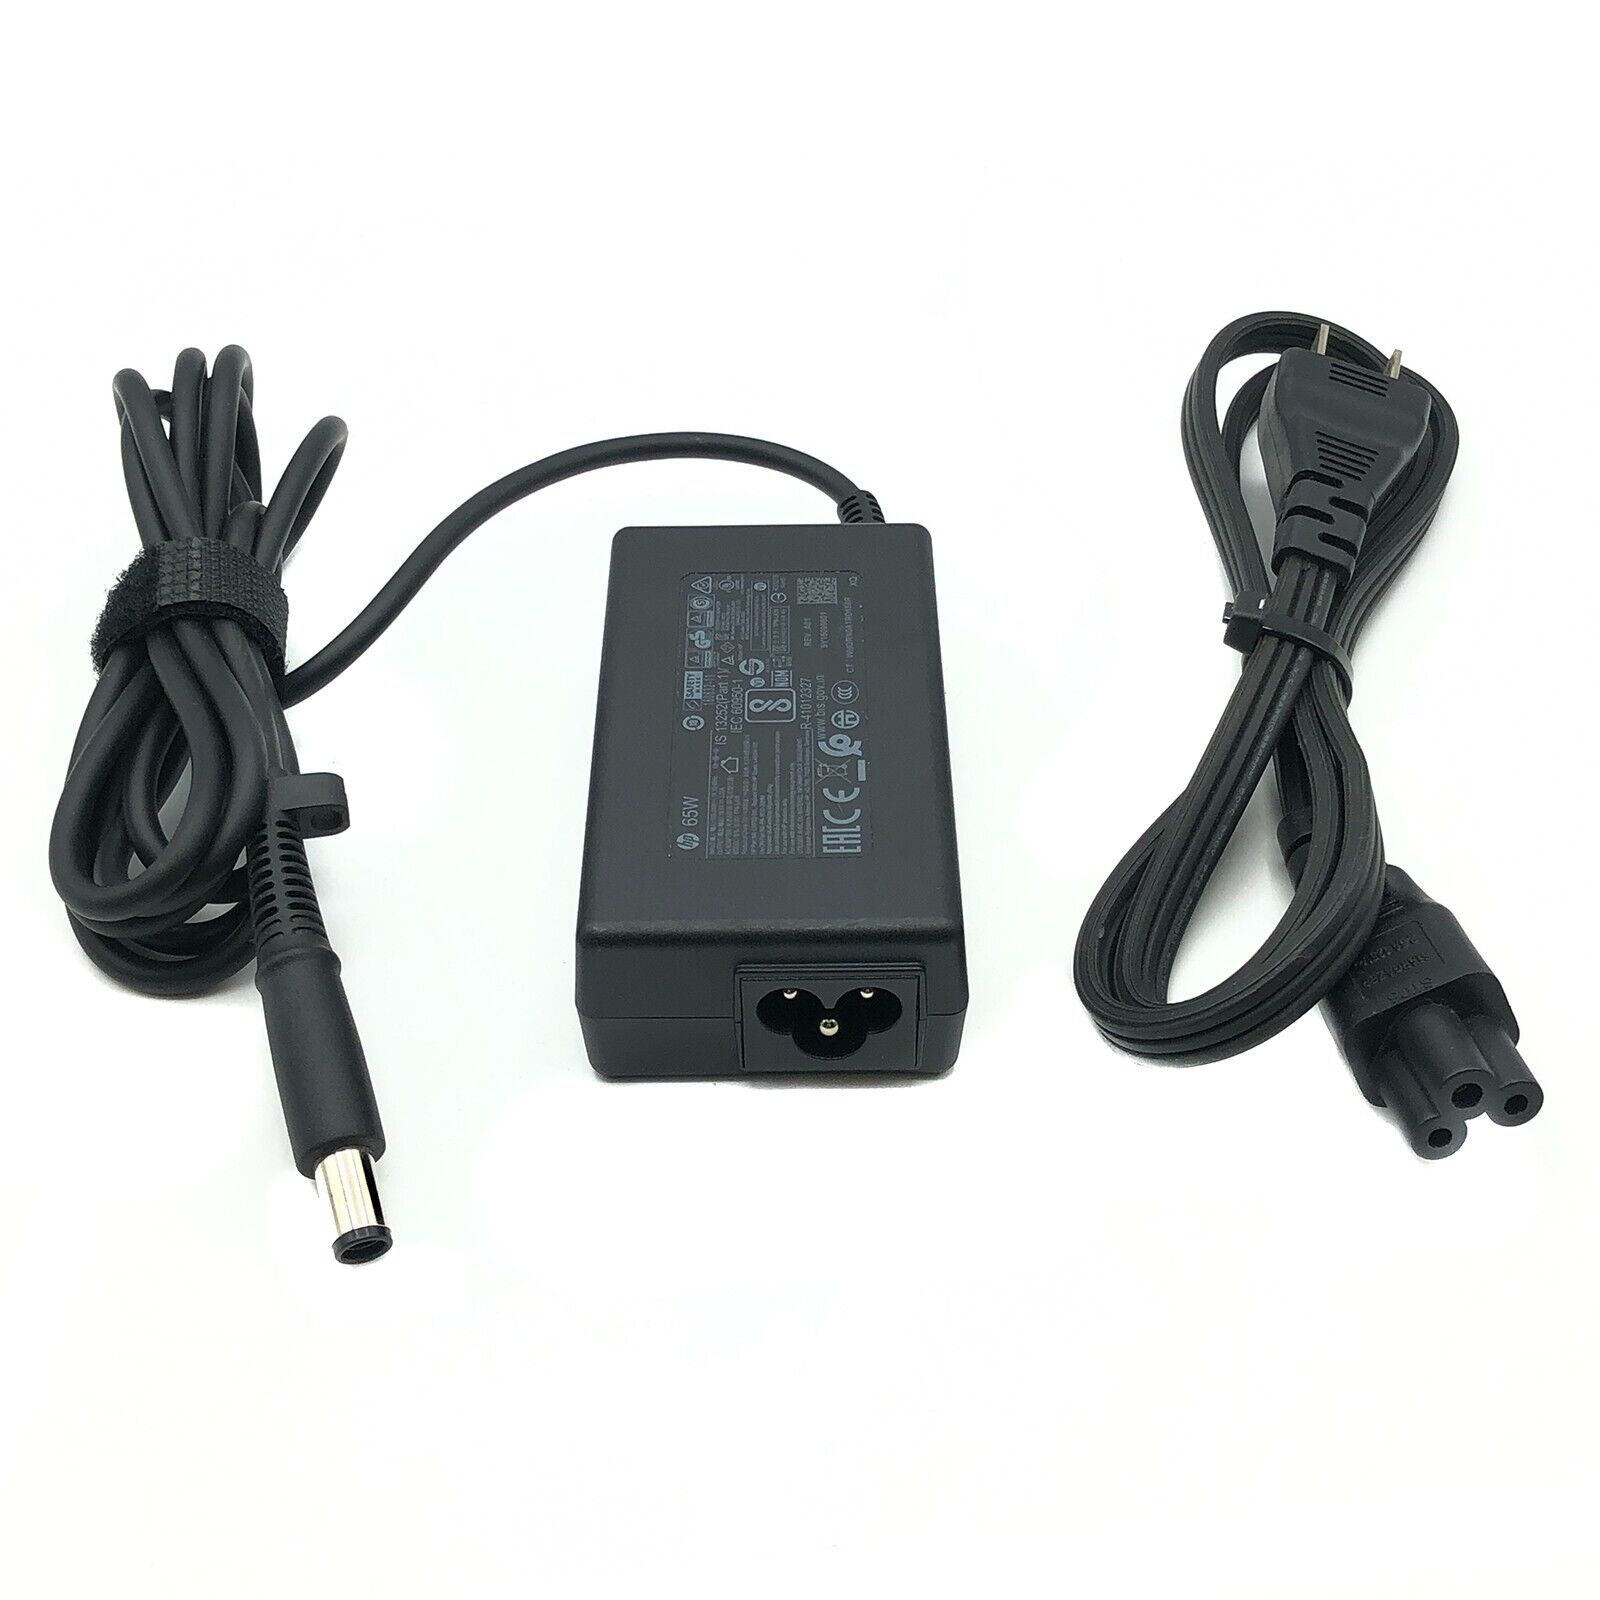 Genuine HP 65W AC DC Adapter Charger for Notebook PC IS 13252 EAC R-41012327